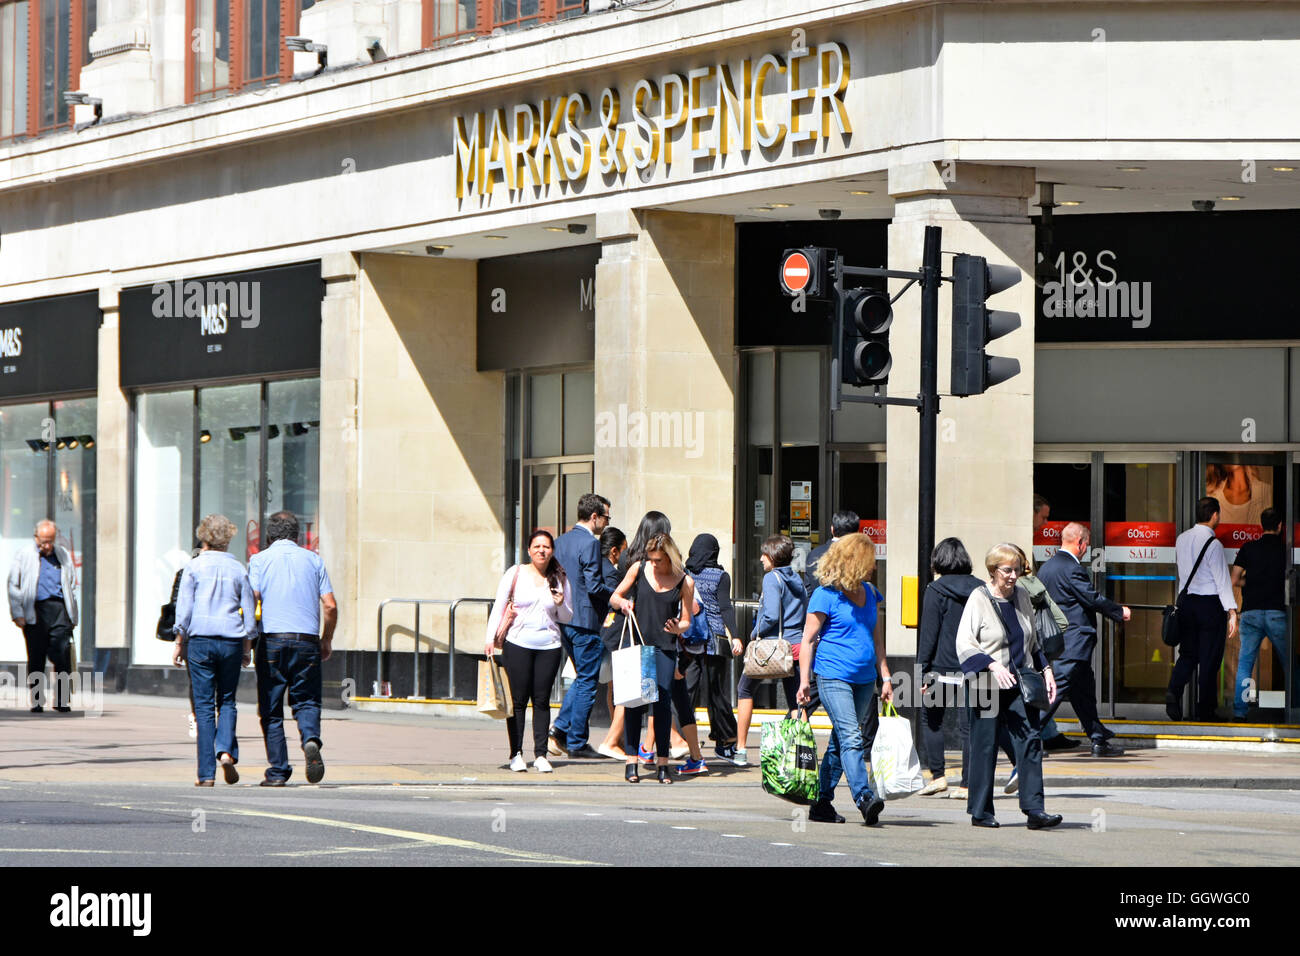 West End shoppers in Oxford Street outside entrance to Marks and Spencer flagship Marble Arch shopping department store in London England UK Stock Photo